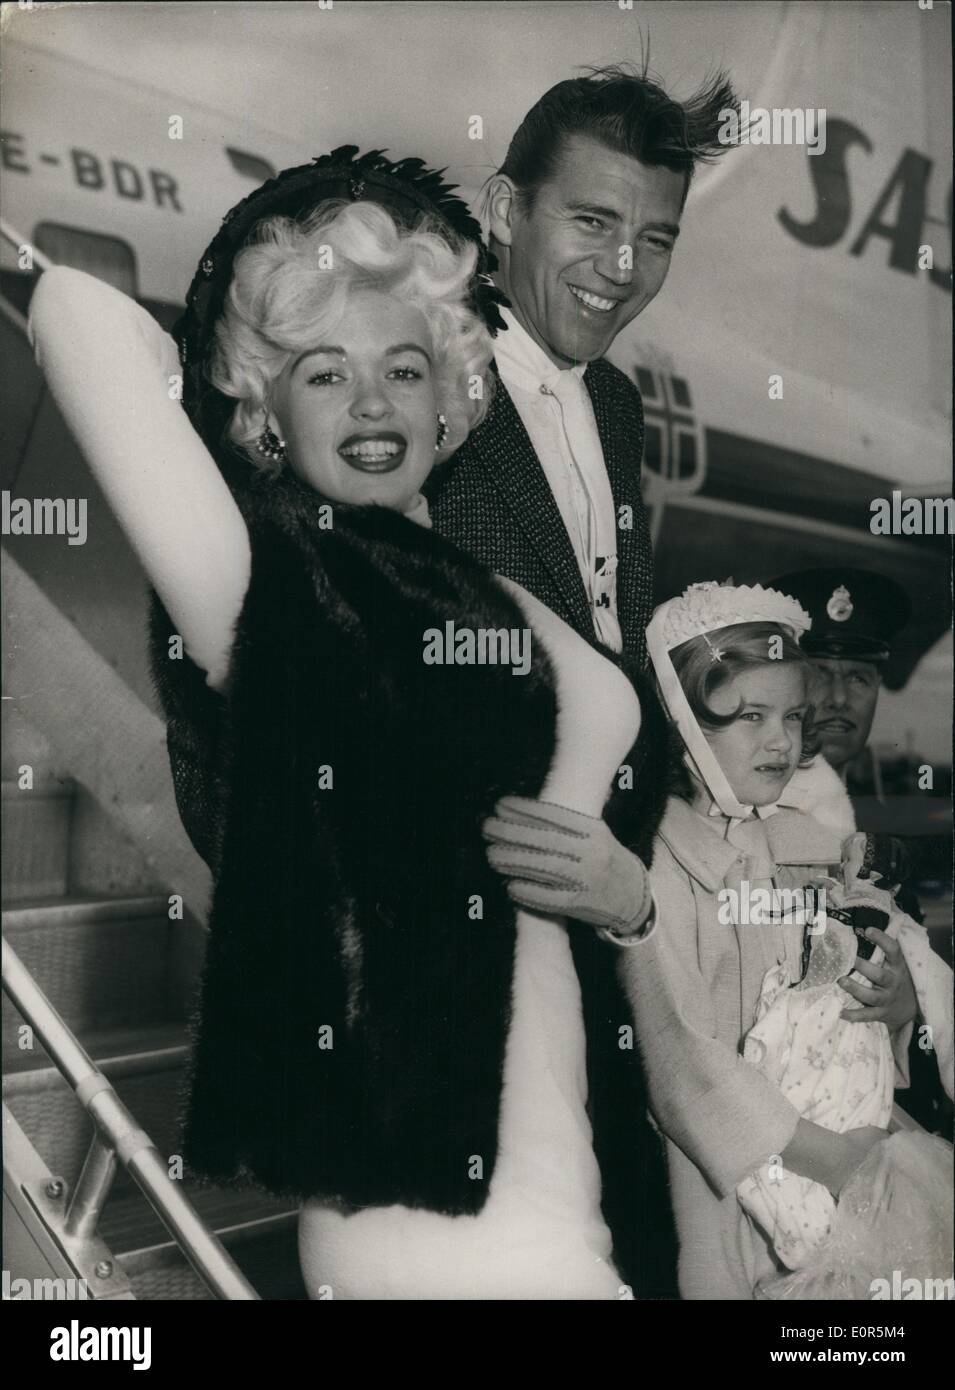 Apr. 04, 1958 - Jayne Mansfield Arrives: Jayne Mansfield, the Hollywood star, arrived at London Airport today. She is to co-star with Kenneth More in the film ''The Sheriff of Fractured Jaw''. She was accompanied by her husband, Mickey Hargitay, and her daughter, Jayne. Photo shows Jayne Mansfield, withe her husband, Mickey Hargitay and her daughter , Jayne, on arrival at London Airport today. Stock Photo